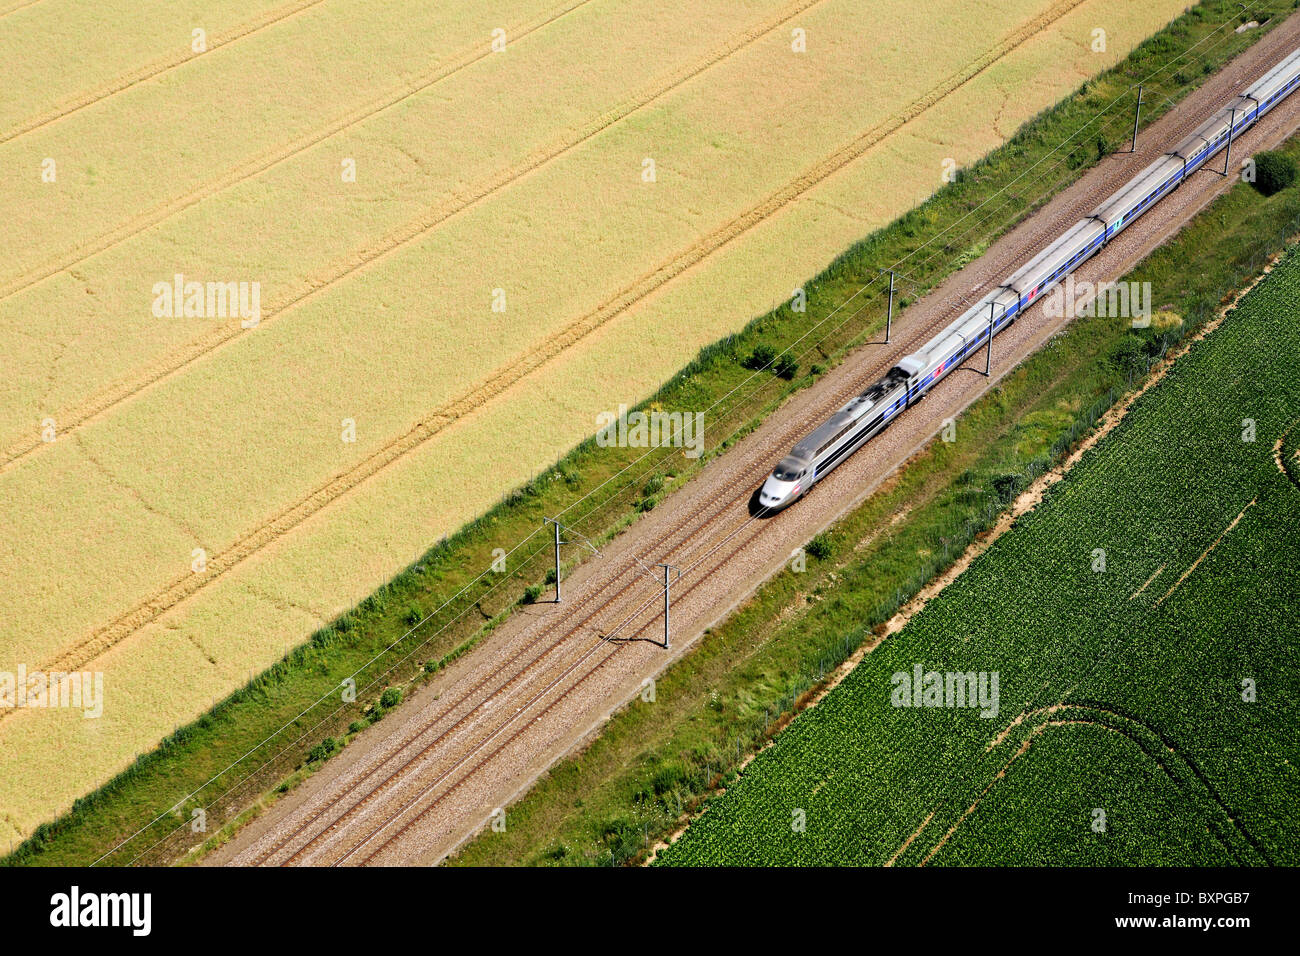 Transports : 'TGV' high speed train in the countryside Stock Photo